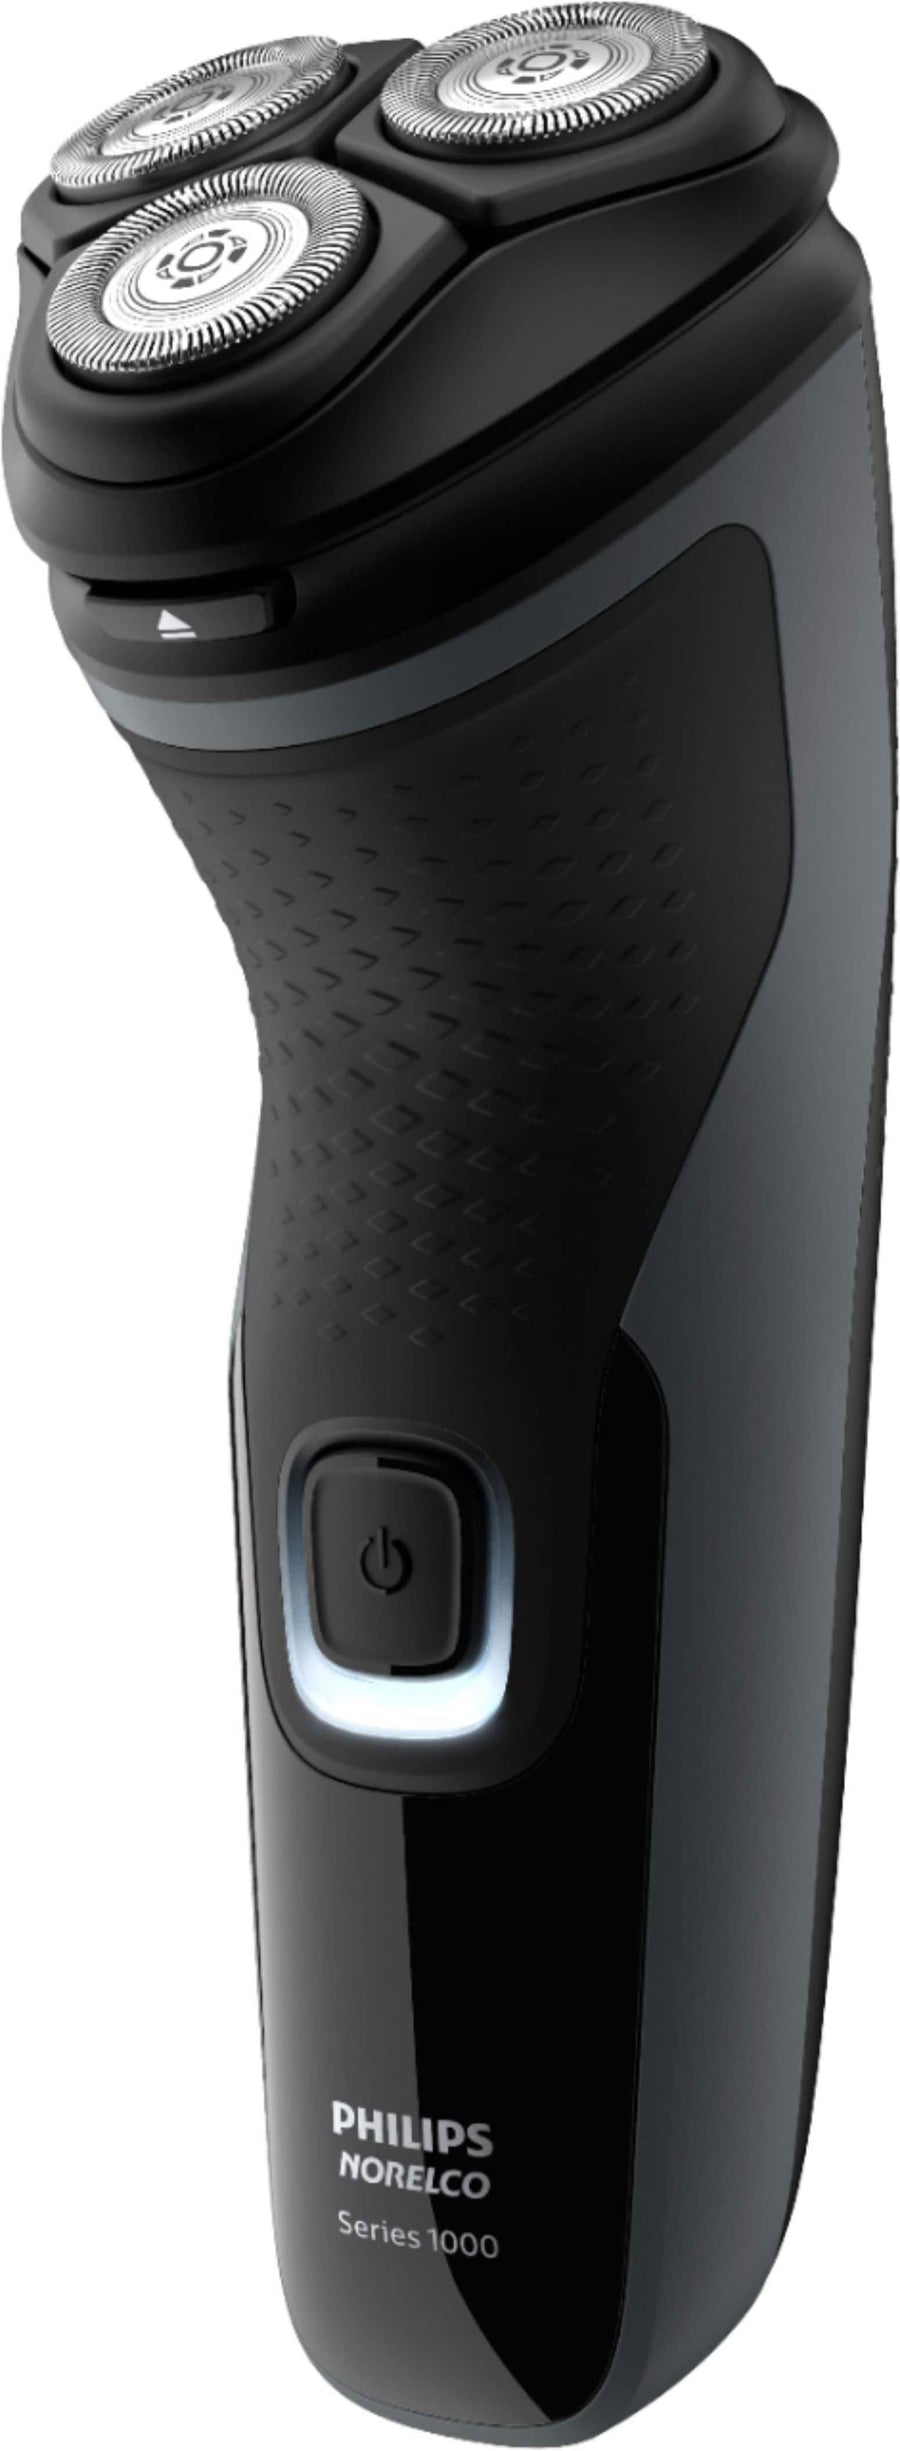 Philips Norelco - Norelco Electric Shaver - Slate Gray_0